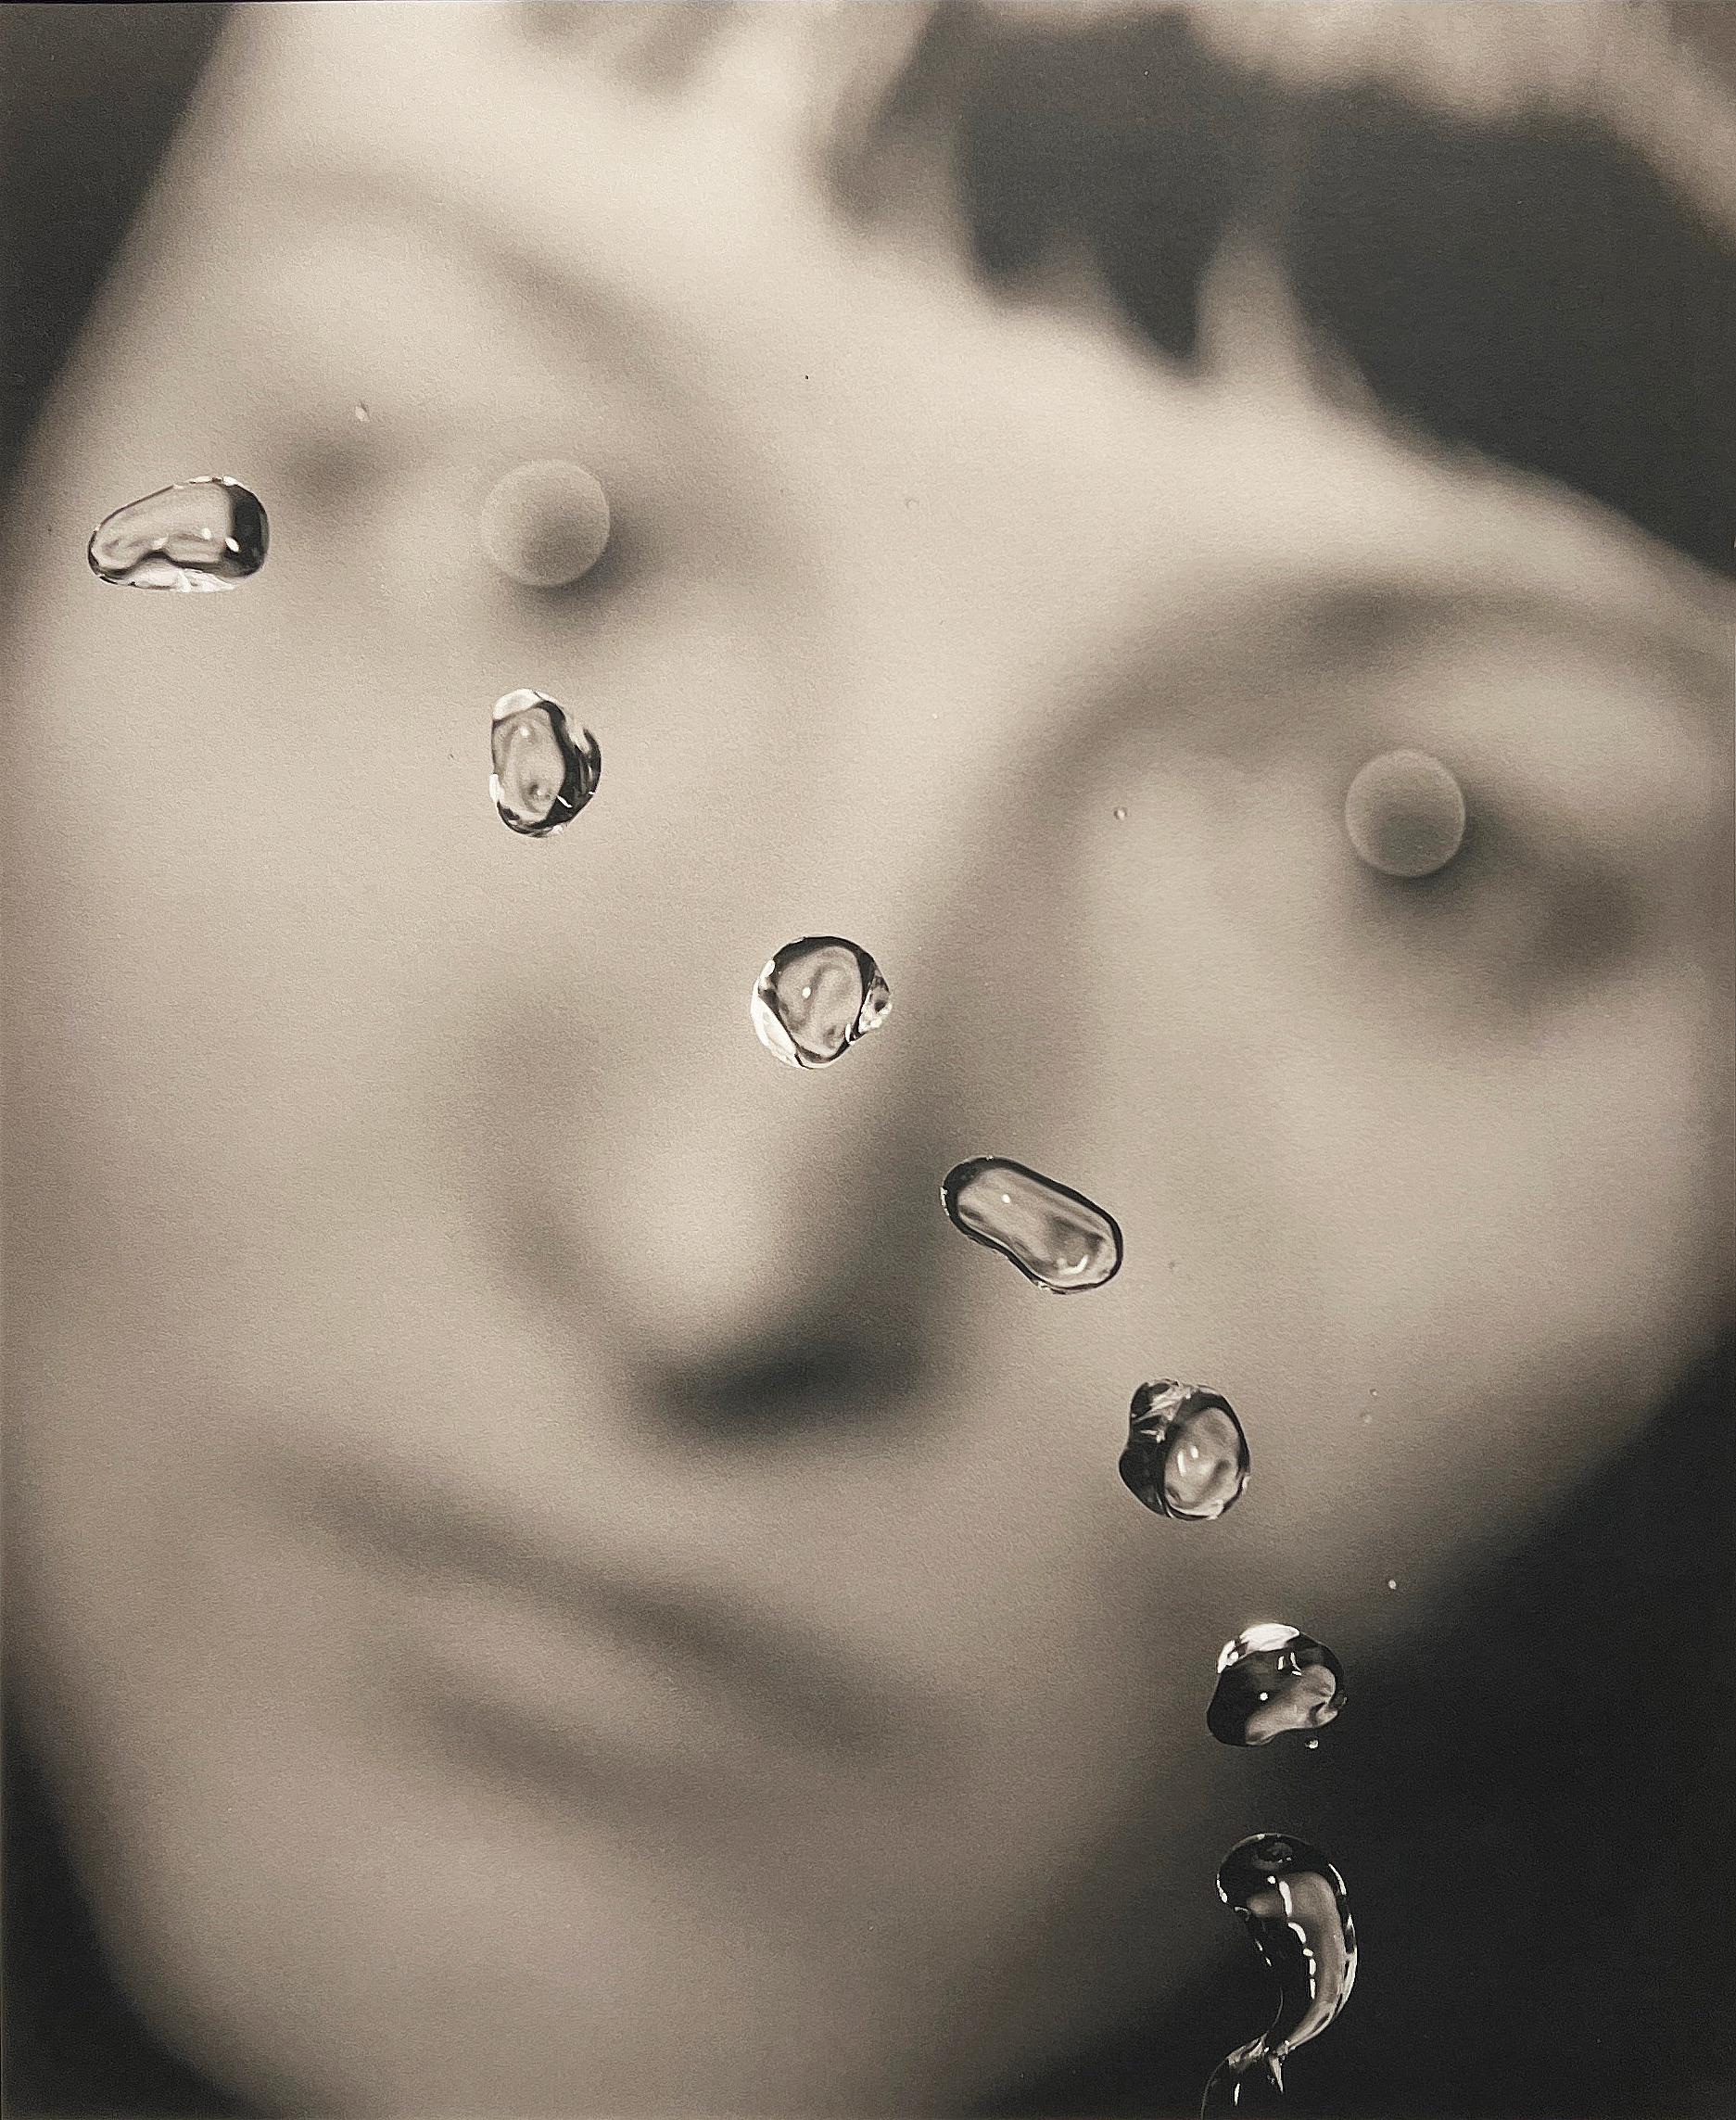 Susan Derges Portrait Print - The Observer and The Observed